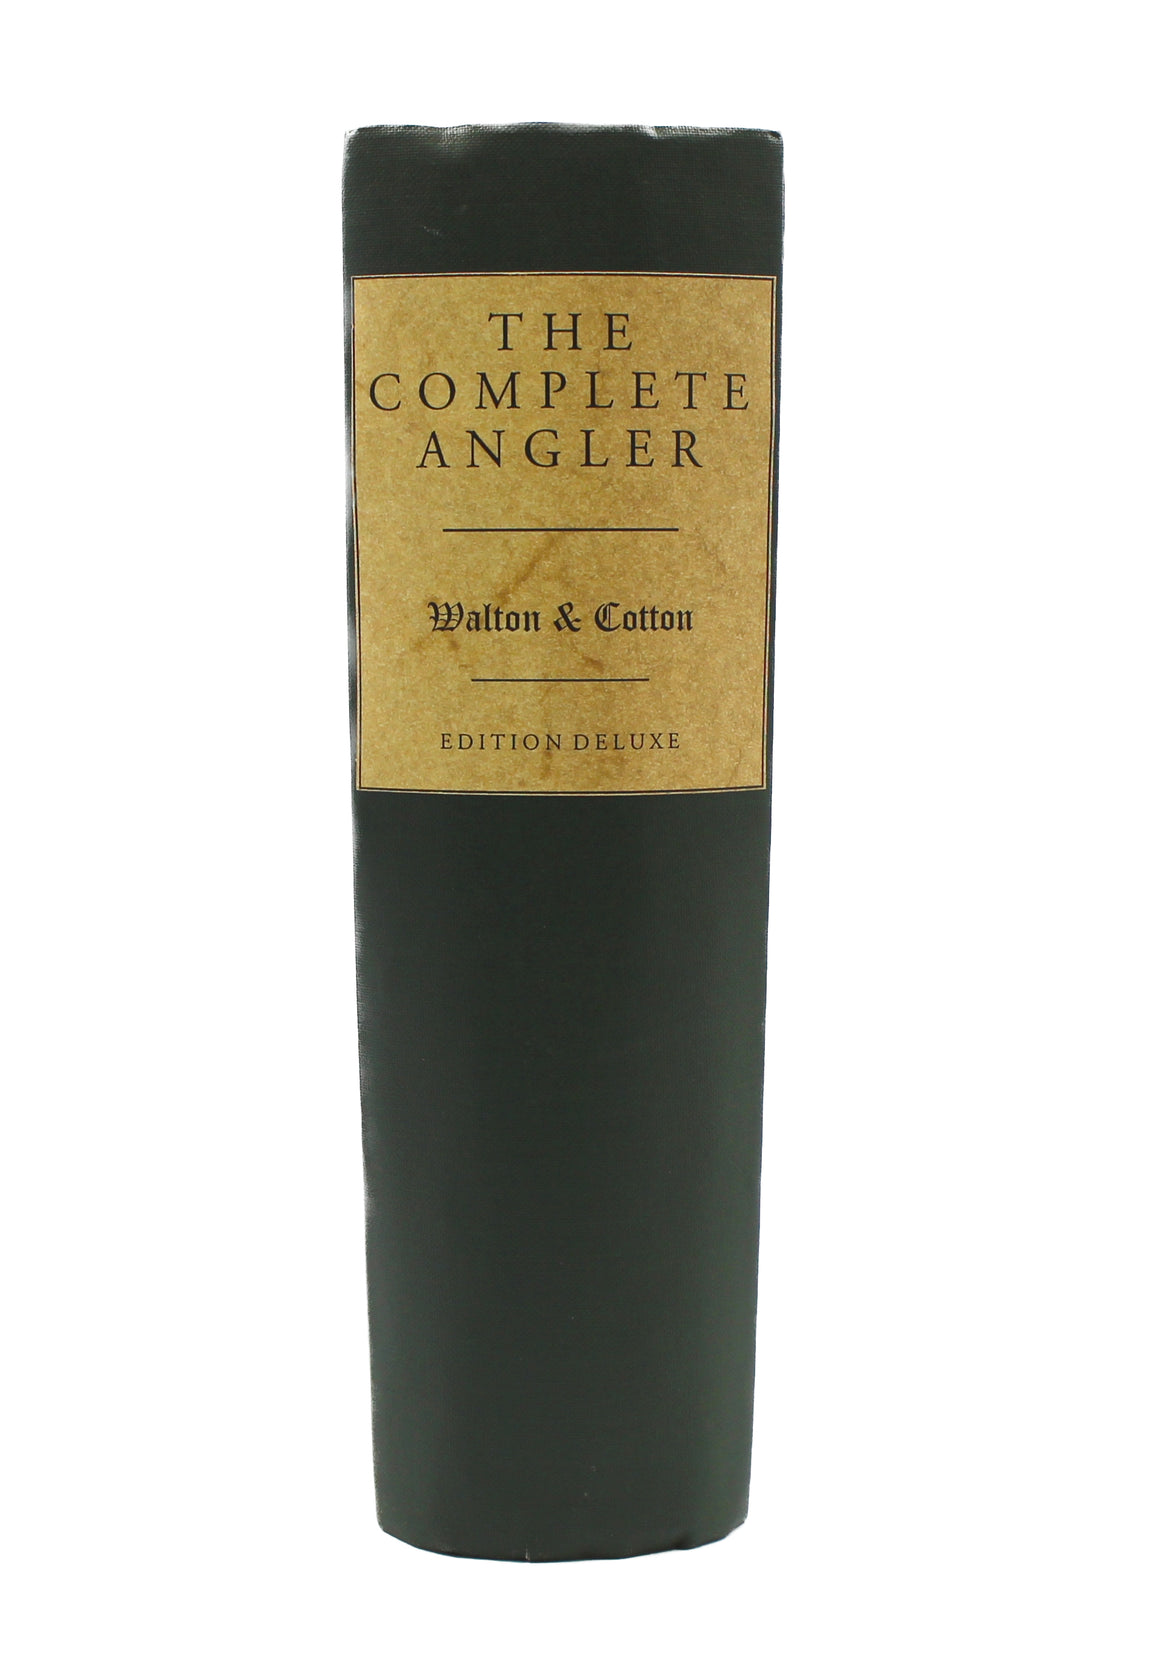 The Complete Angler by Izaak Walton and Charles Cotton, Edited by John Major, Second Lippincott Edition, Limited Issue 84/250, 1881